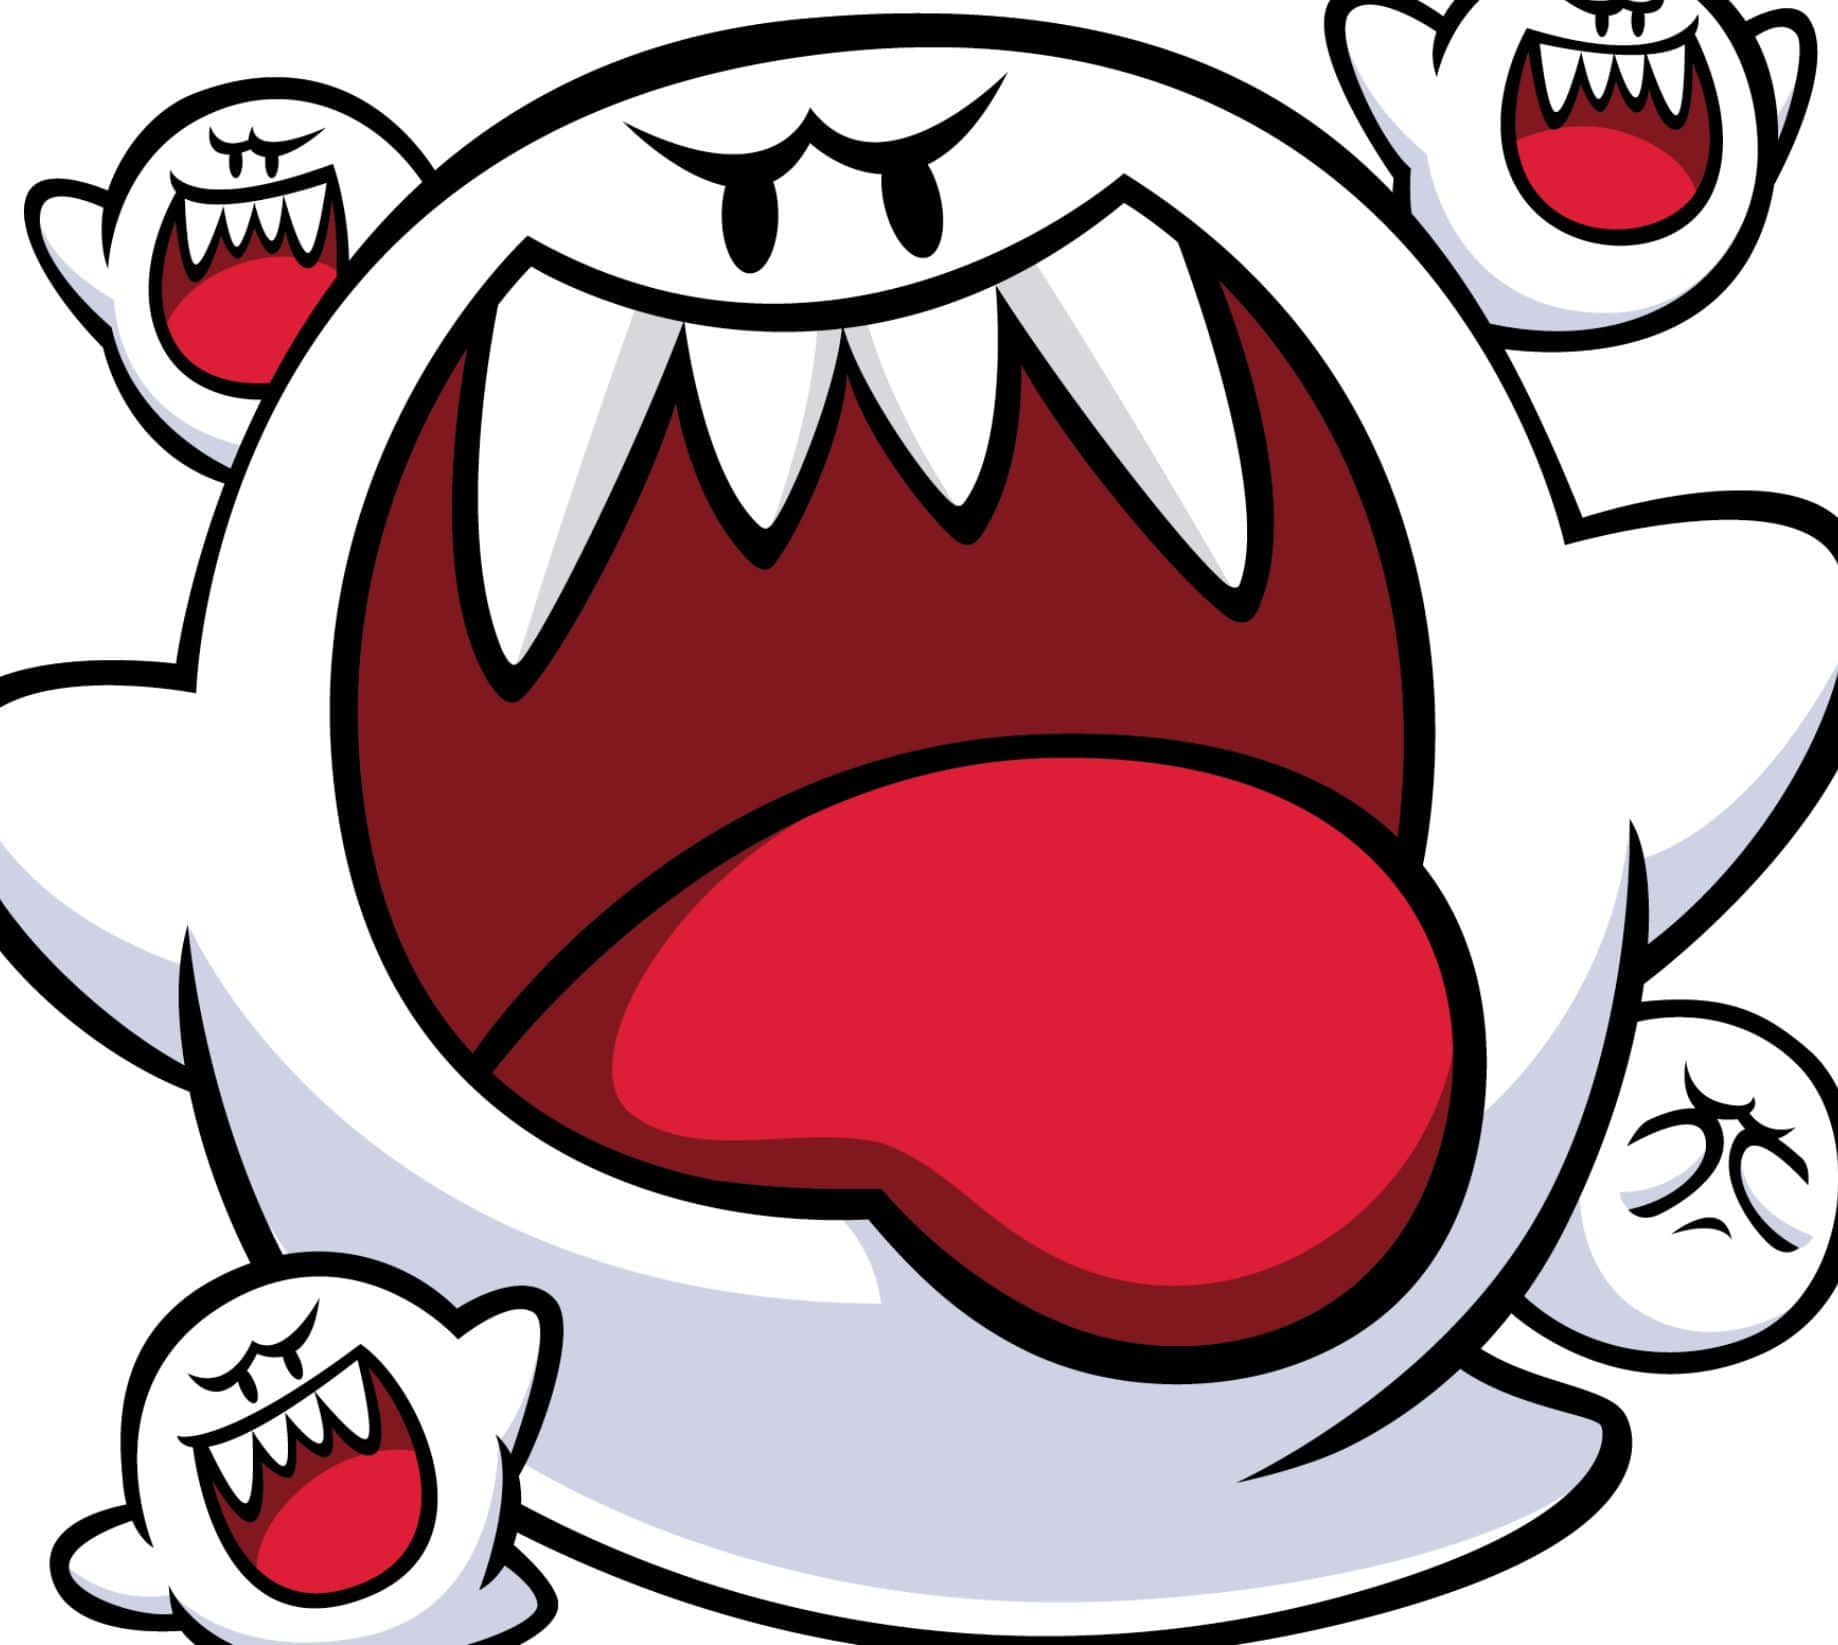 King Boo: The Fearsome Ghost of the Mushroom Kingdom Wallpaper